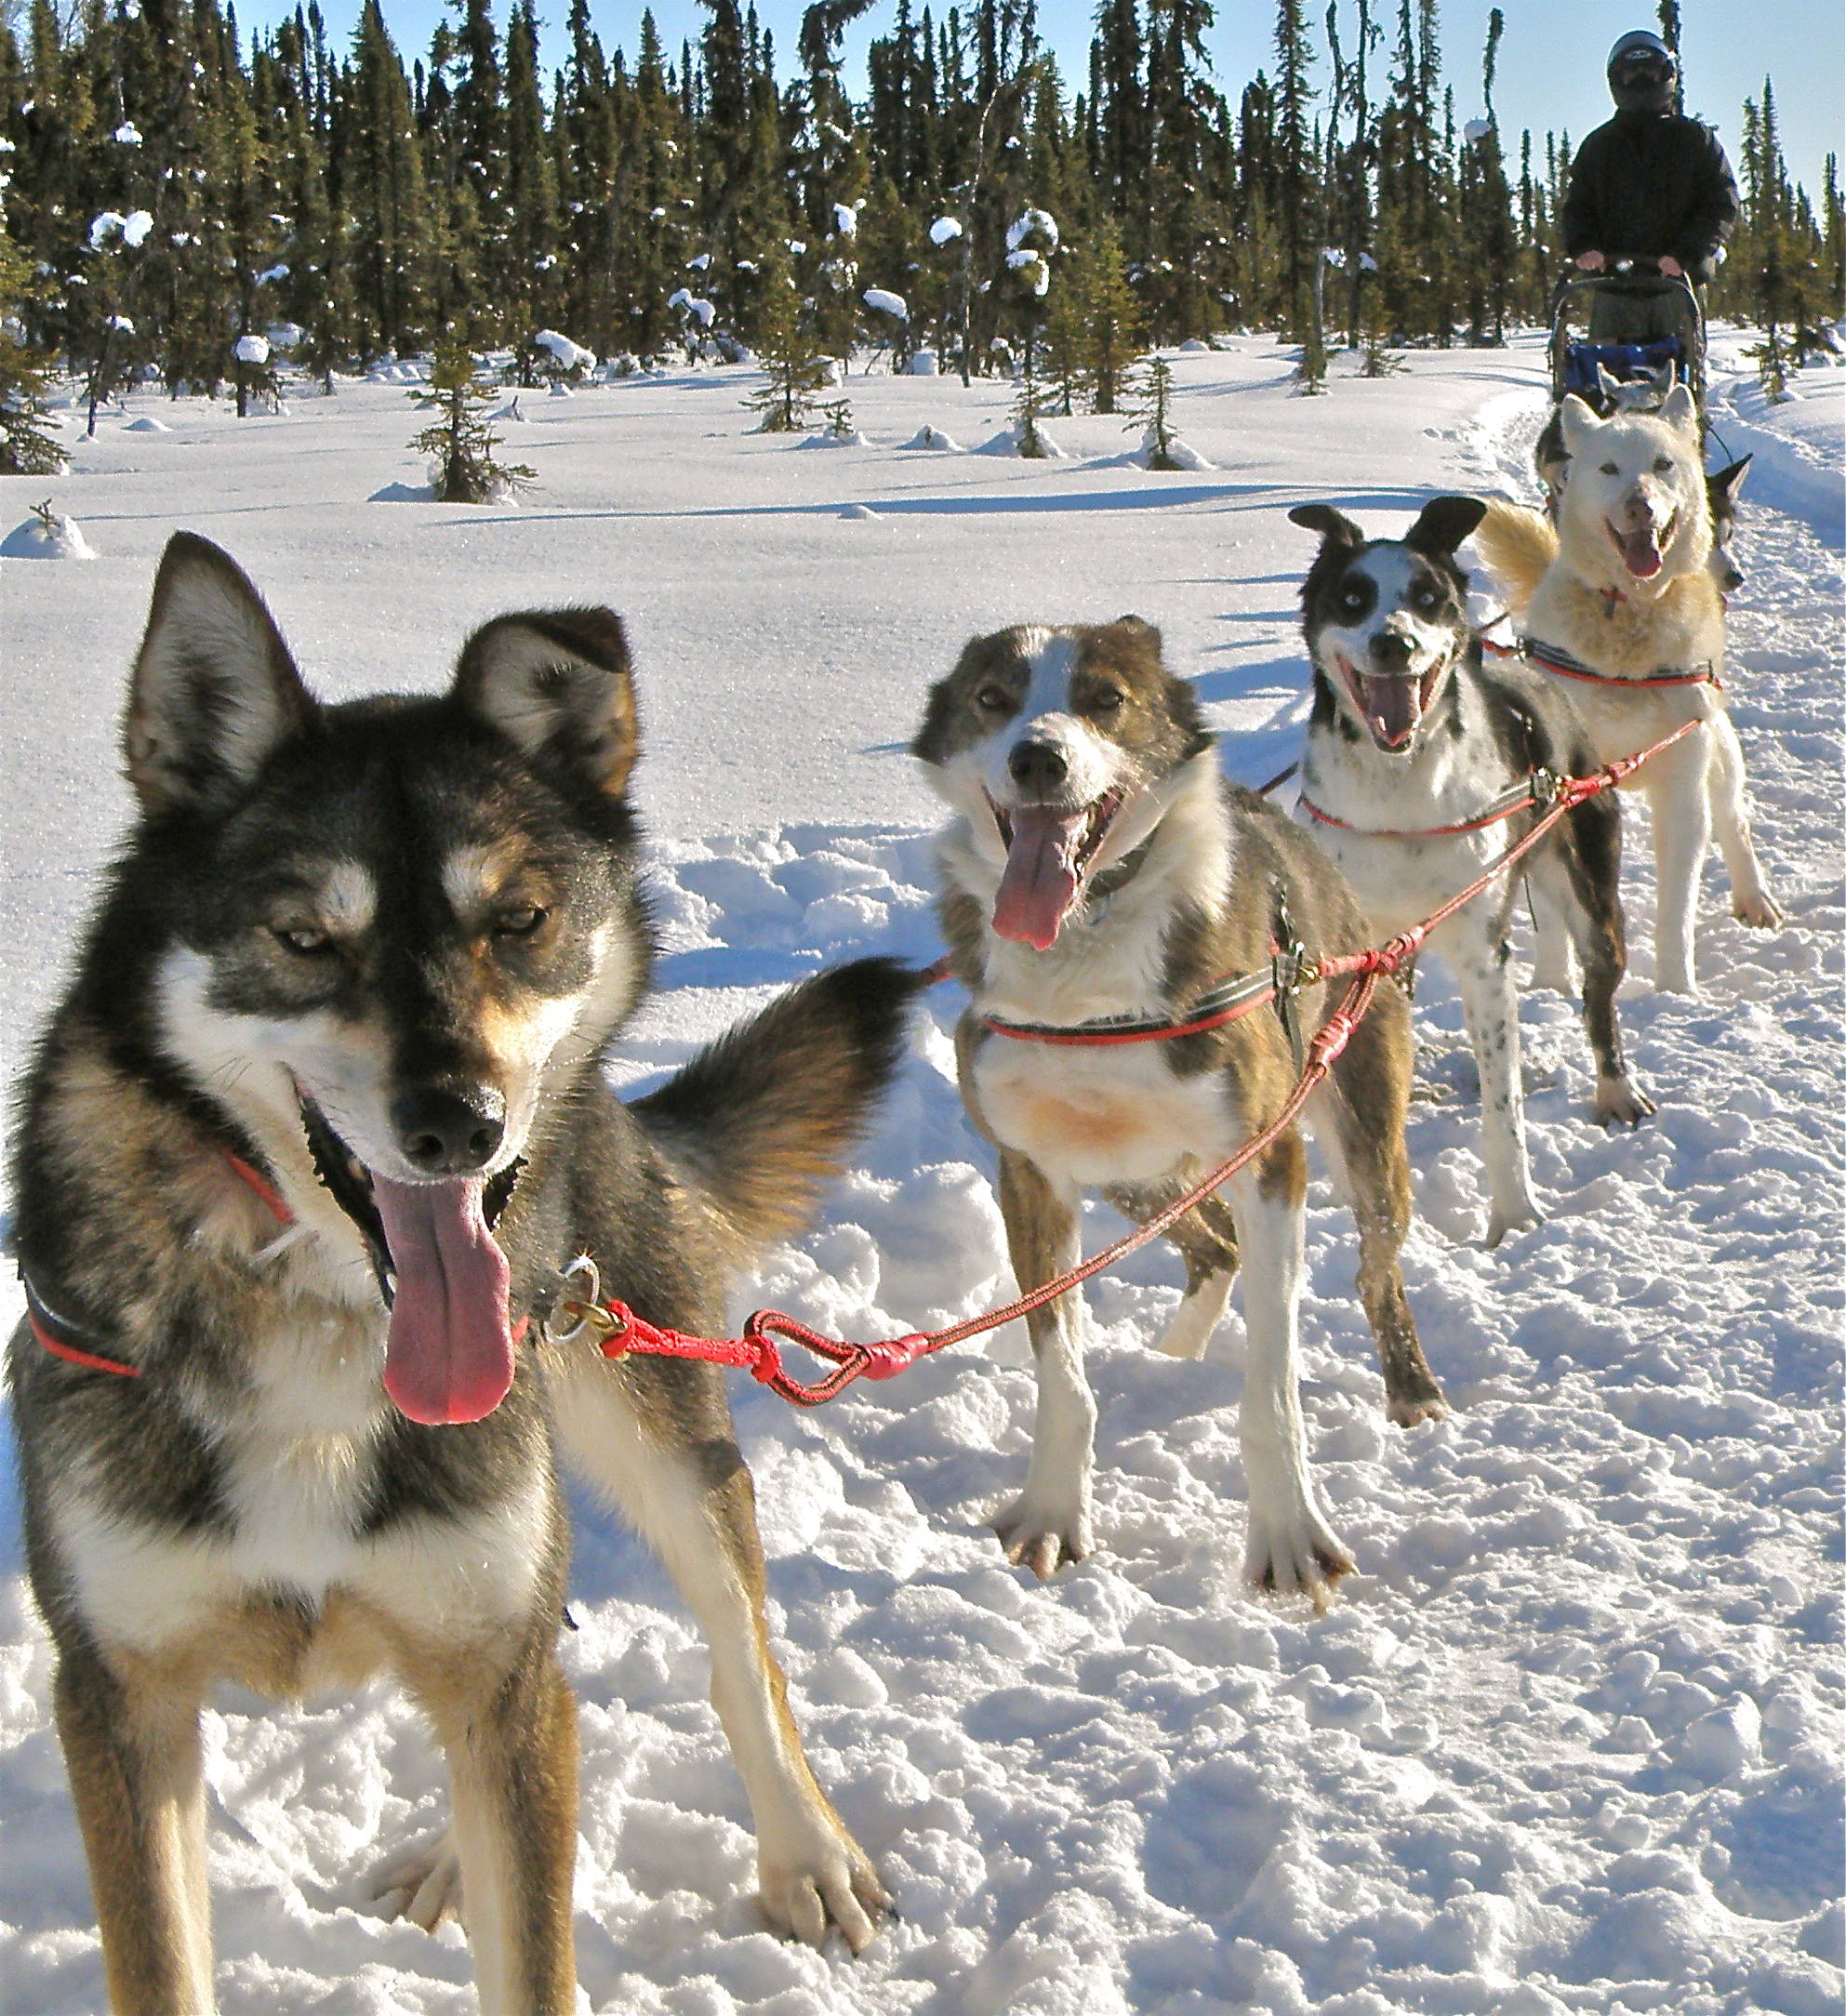 Bill Laughing-Bear, of Kasilof, and his dog sled team line up for a run. (Photo courtesy of Bill Laughing-Bear)